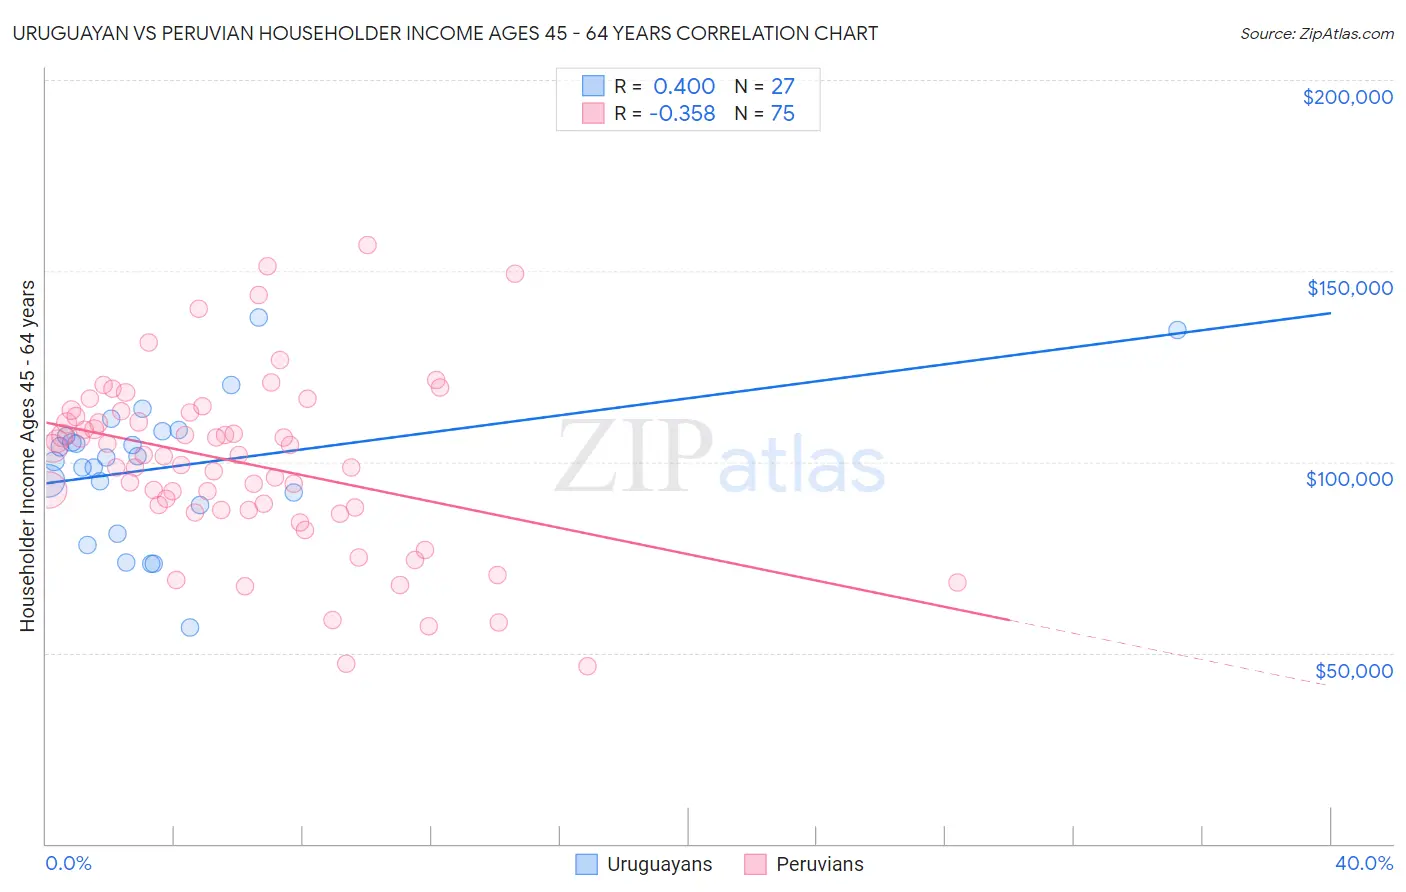 Uruguayan vs Peruvian Householder Income Ages 45 - 64 years